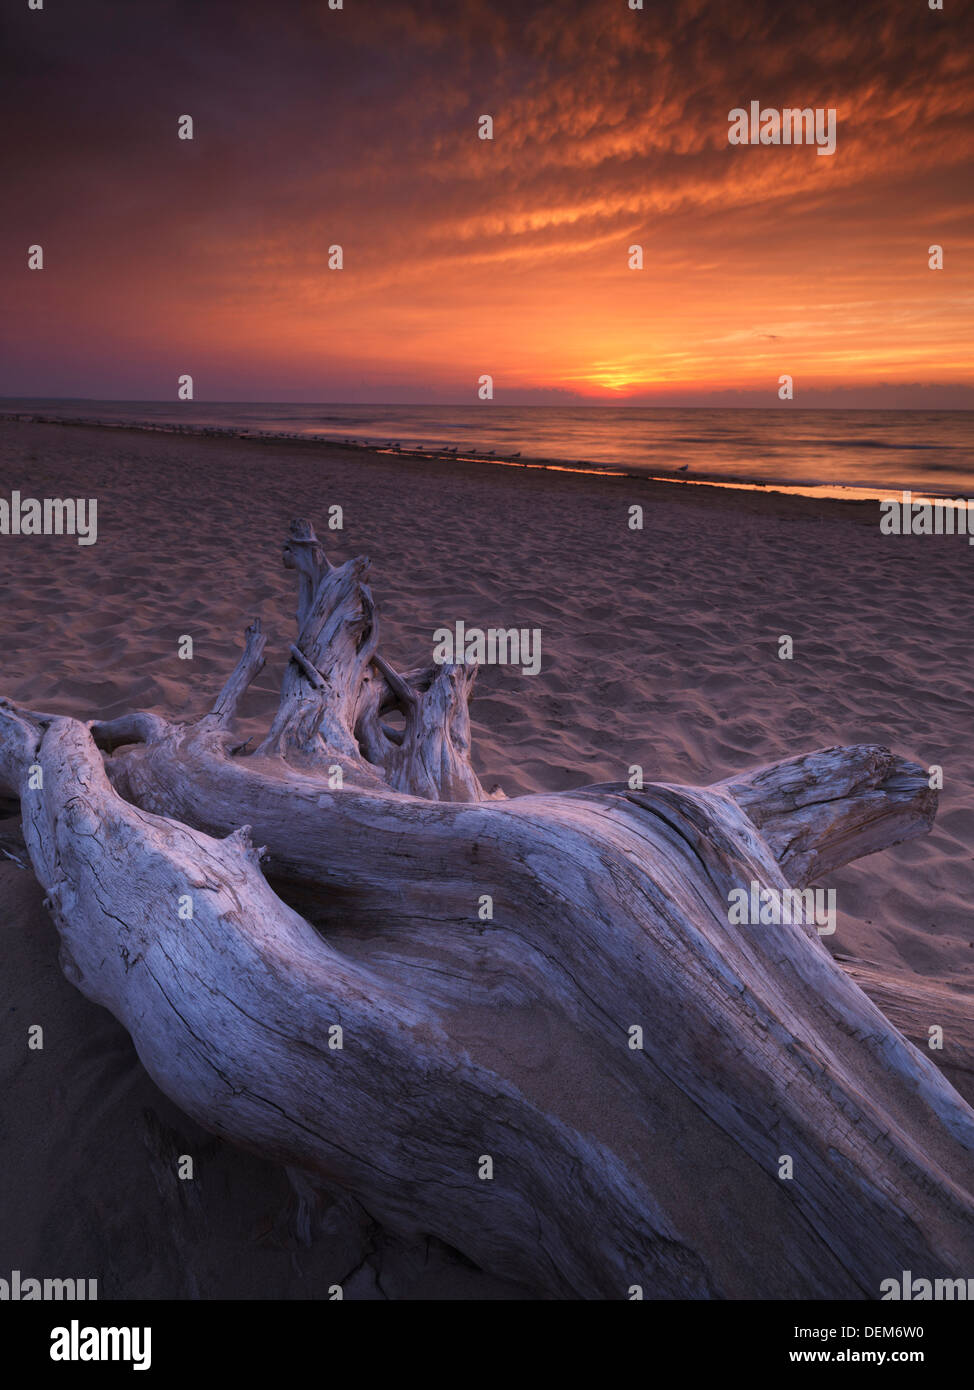 Driftwood on a shore of lake Huron with beautiful red sunset over it, summertime nature landscape scenery Stock Photo